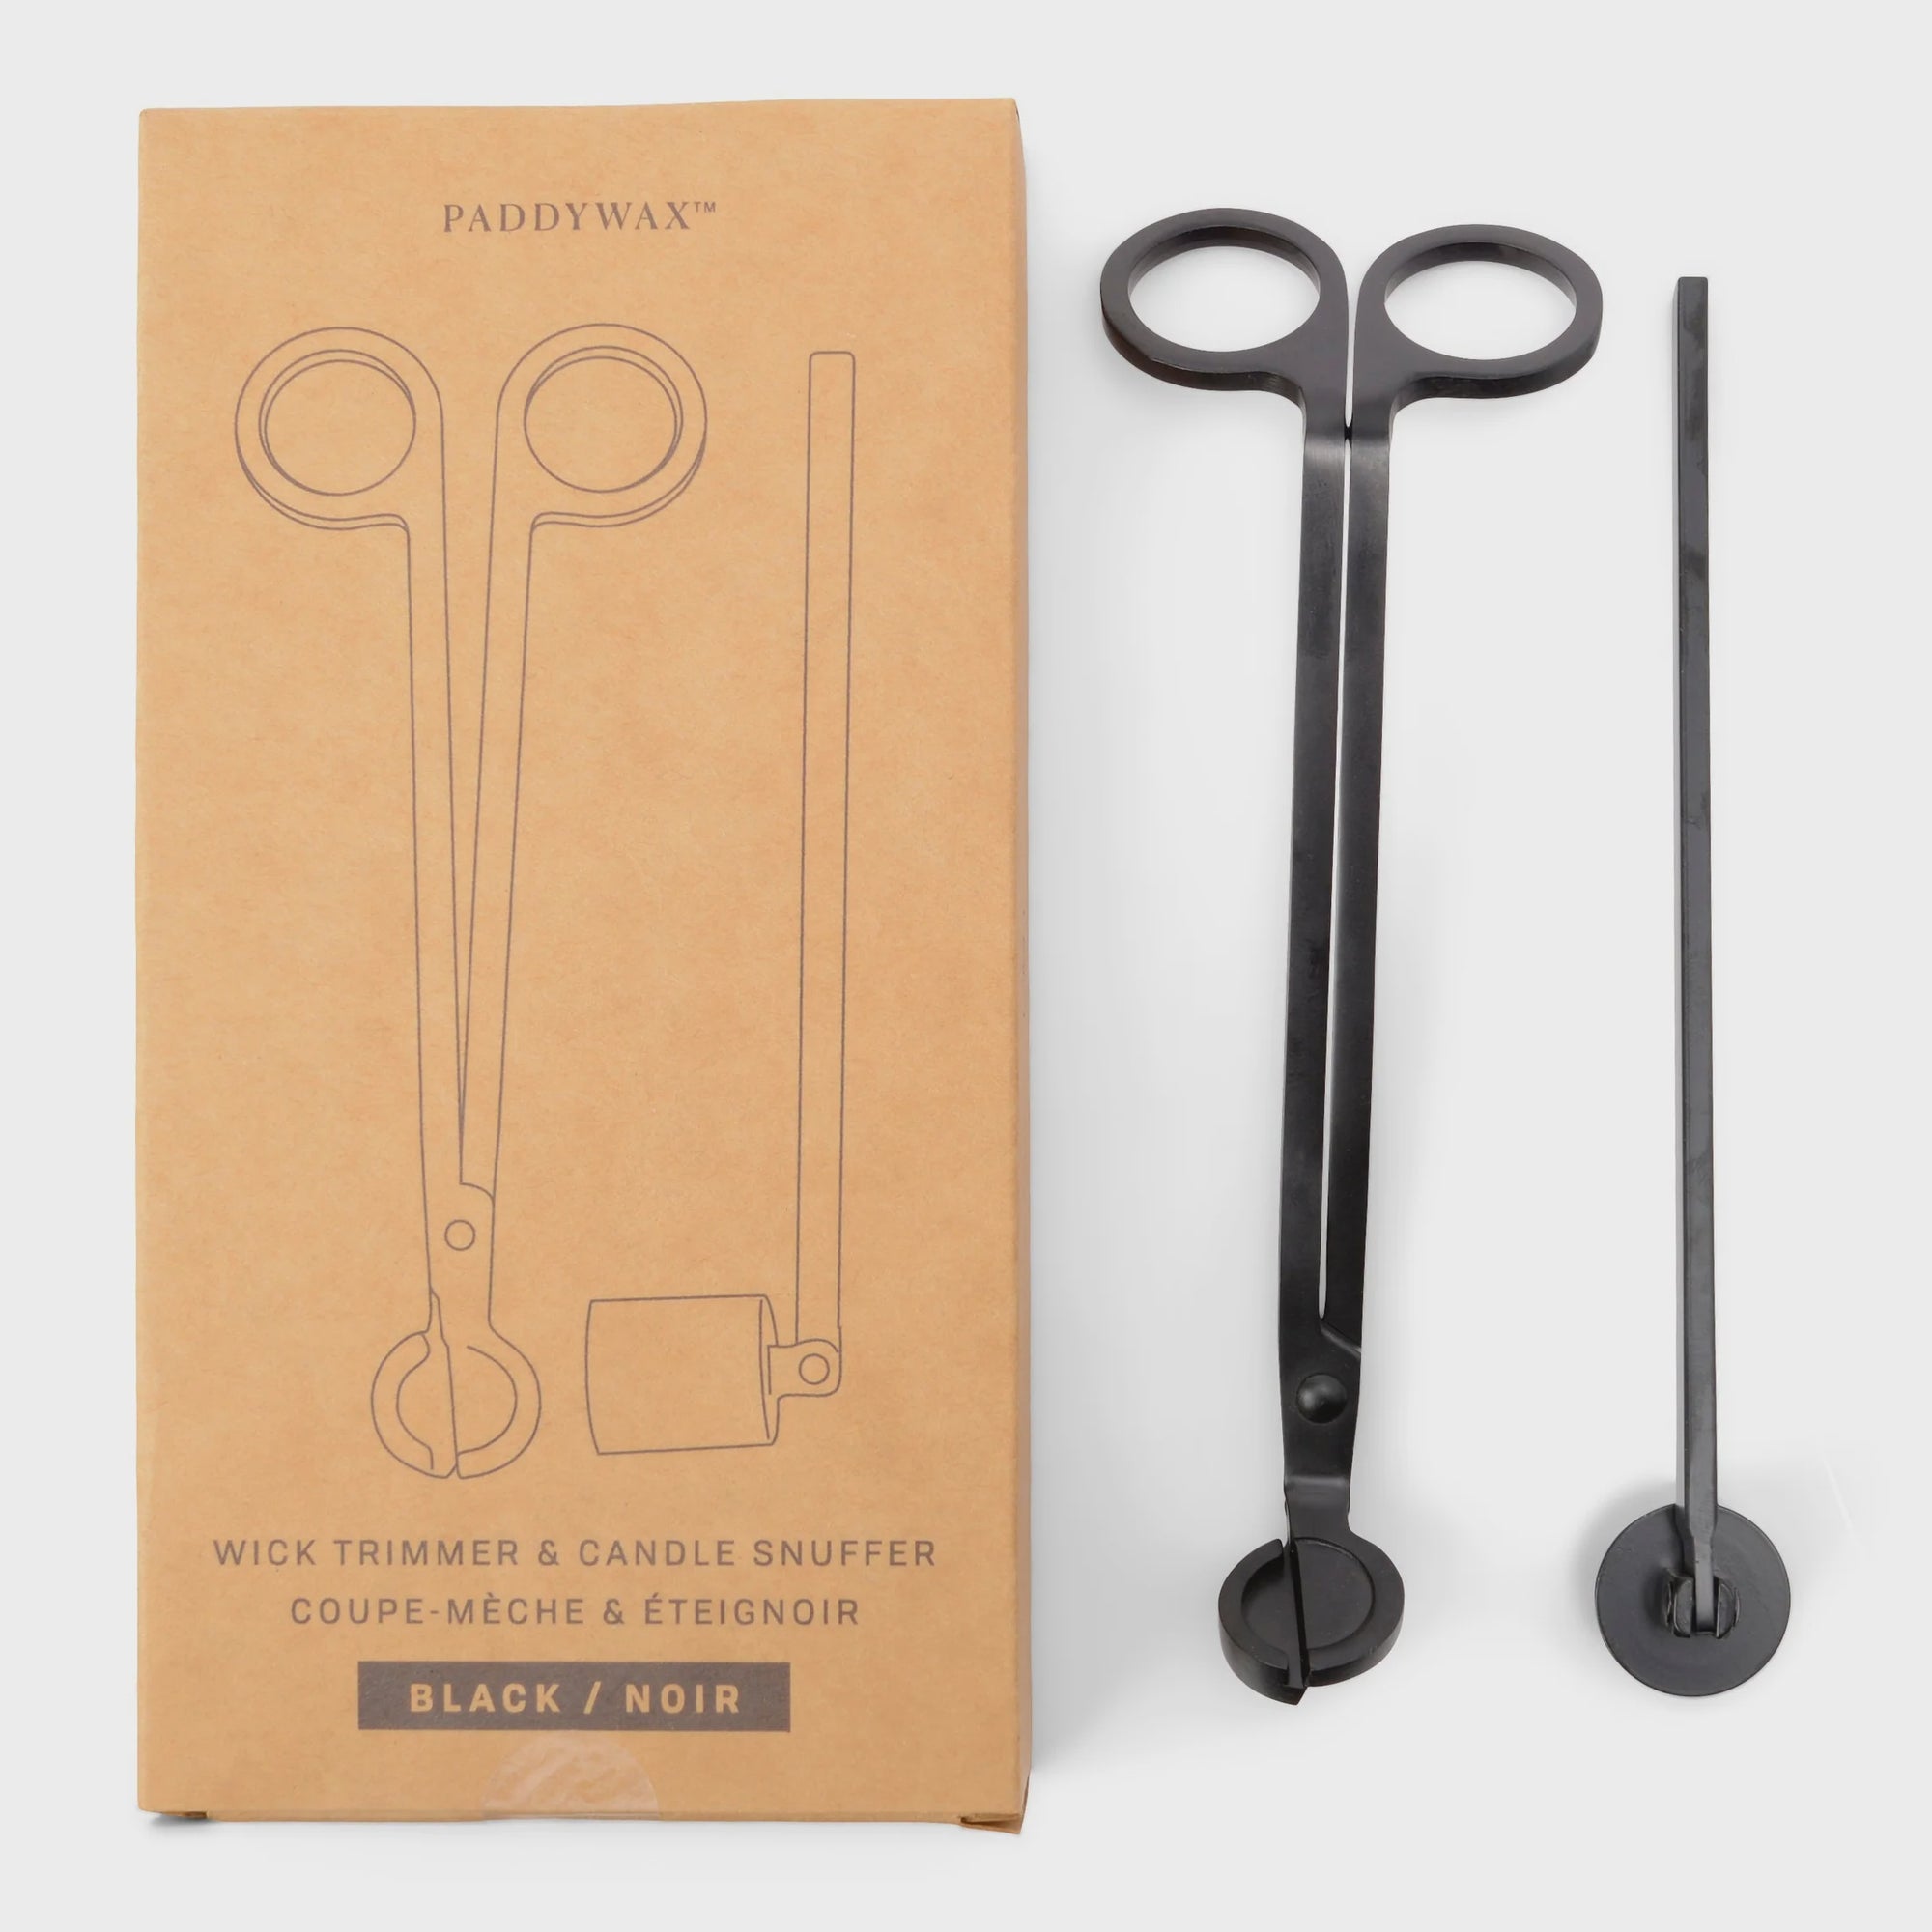 Paddywax Candle Trimmer Snuffer Set